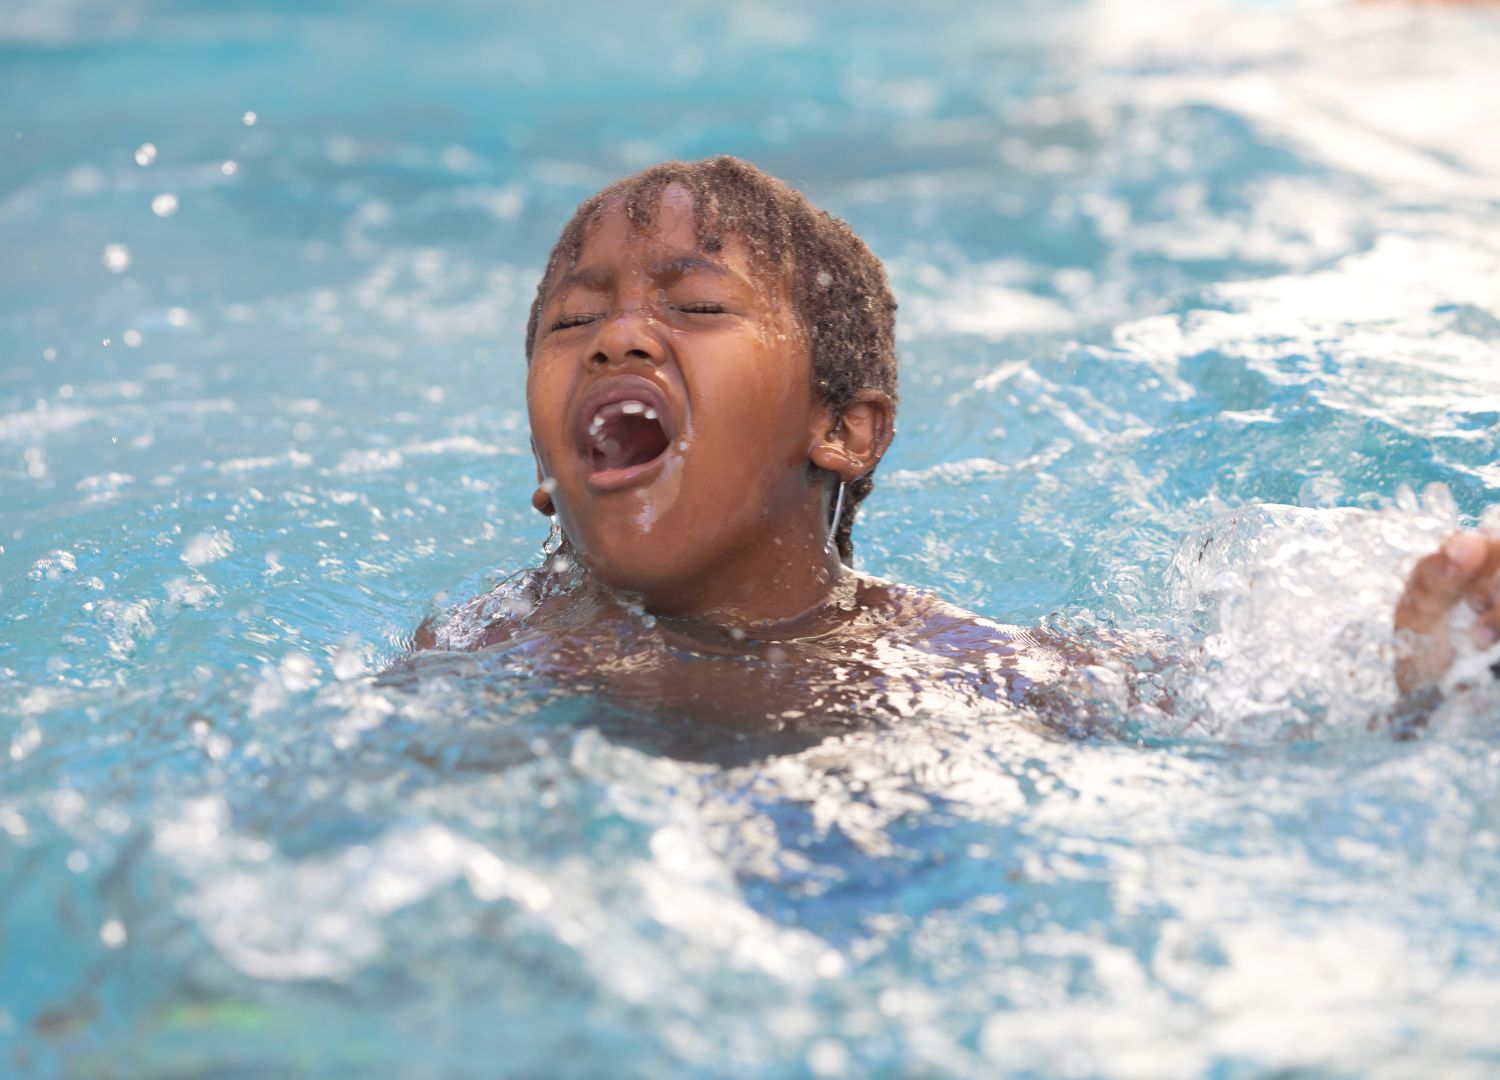 The Drowning Child: Tips to save their life